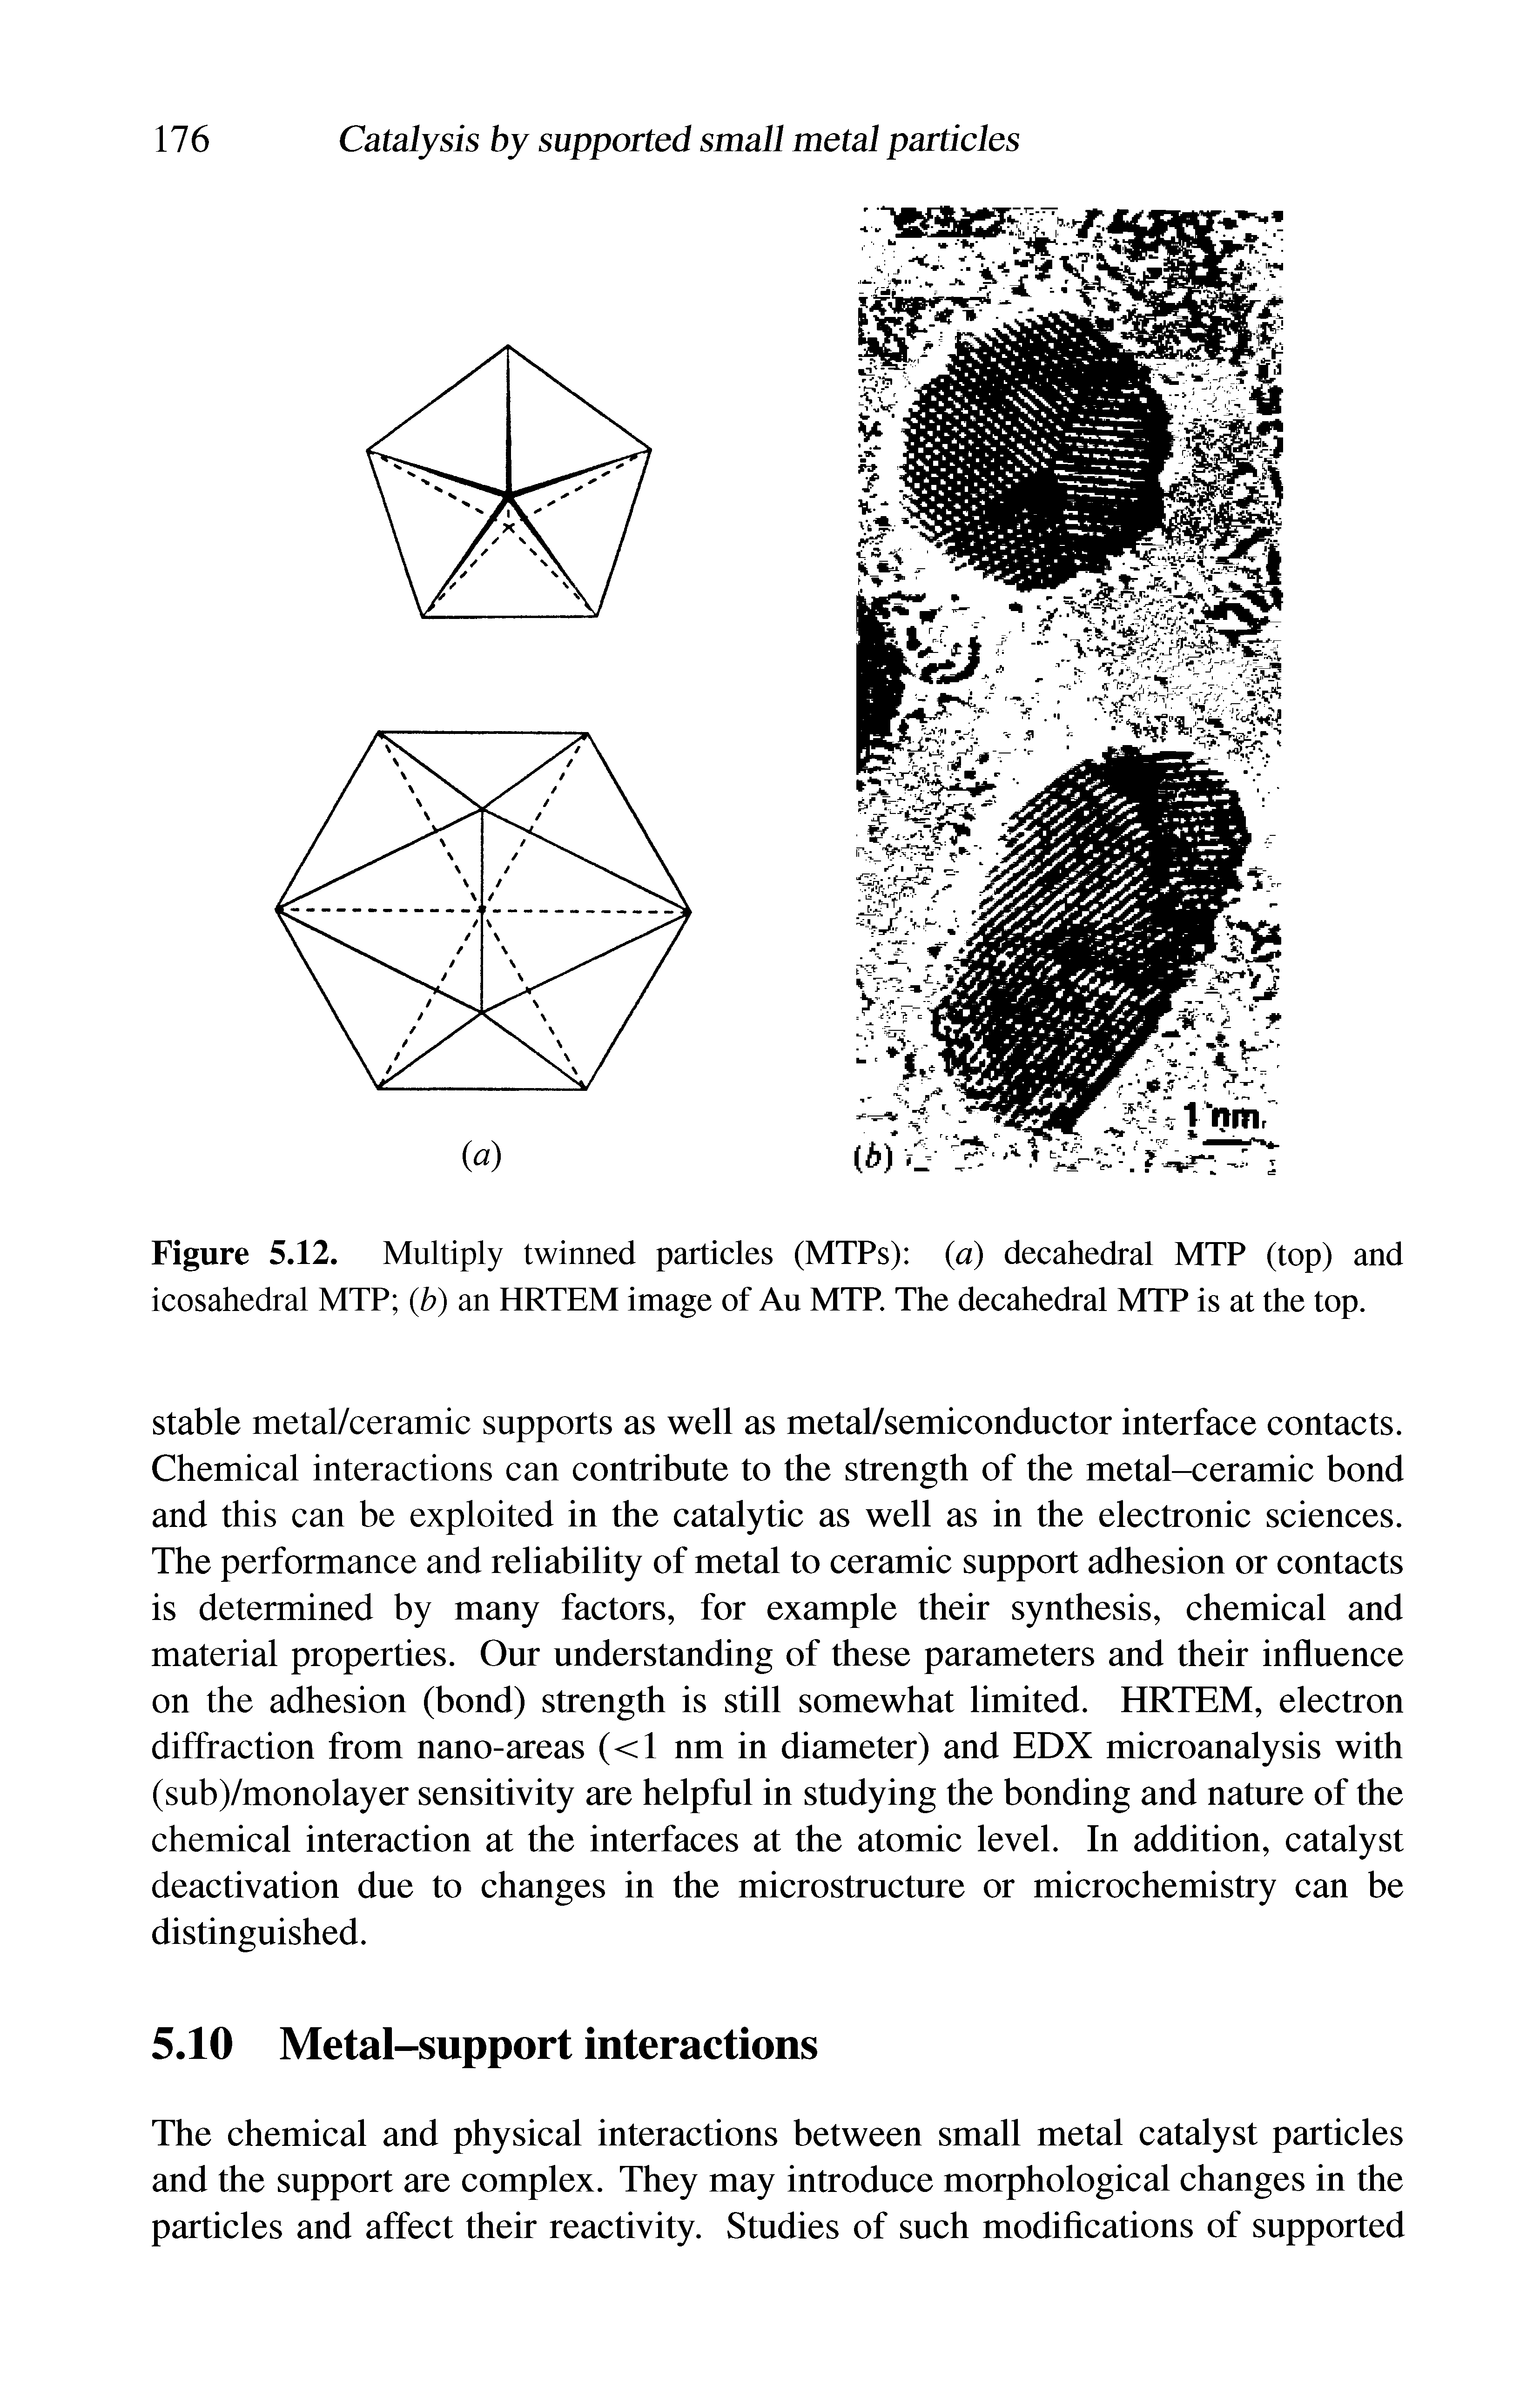 Figure 5.12. Multiply twinned particles (MTPs) (a) decahedral MTP (top) and icosahedral MTP (b) an HRTEM image of Au MTP. The decahedral MTP is at the top.